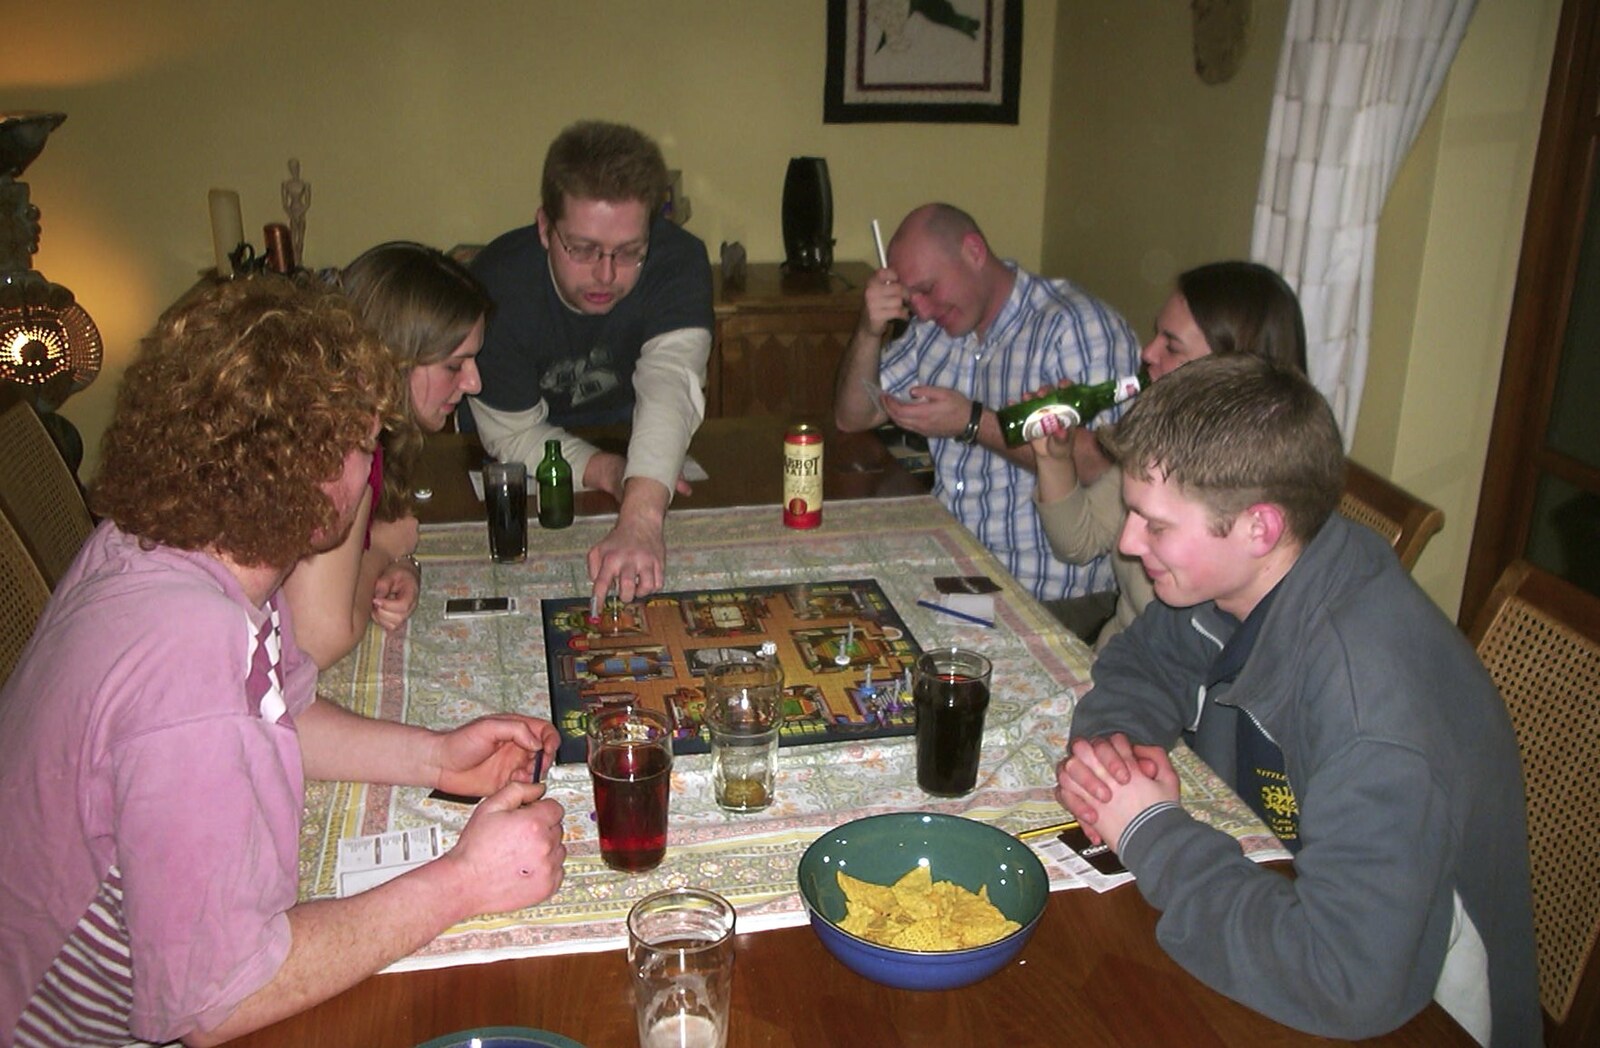 An intense game of Cluedo is in progress from Sarah's Games Night at Anne's, Thornham, Suffolk - 27th December 2003